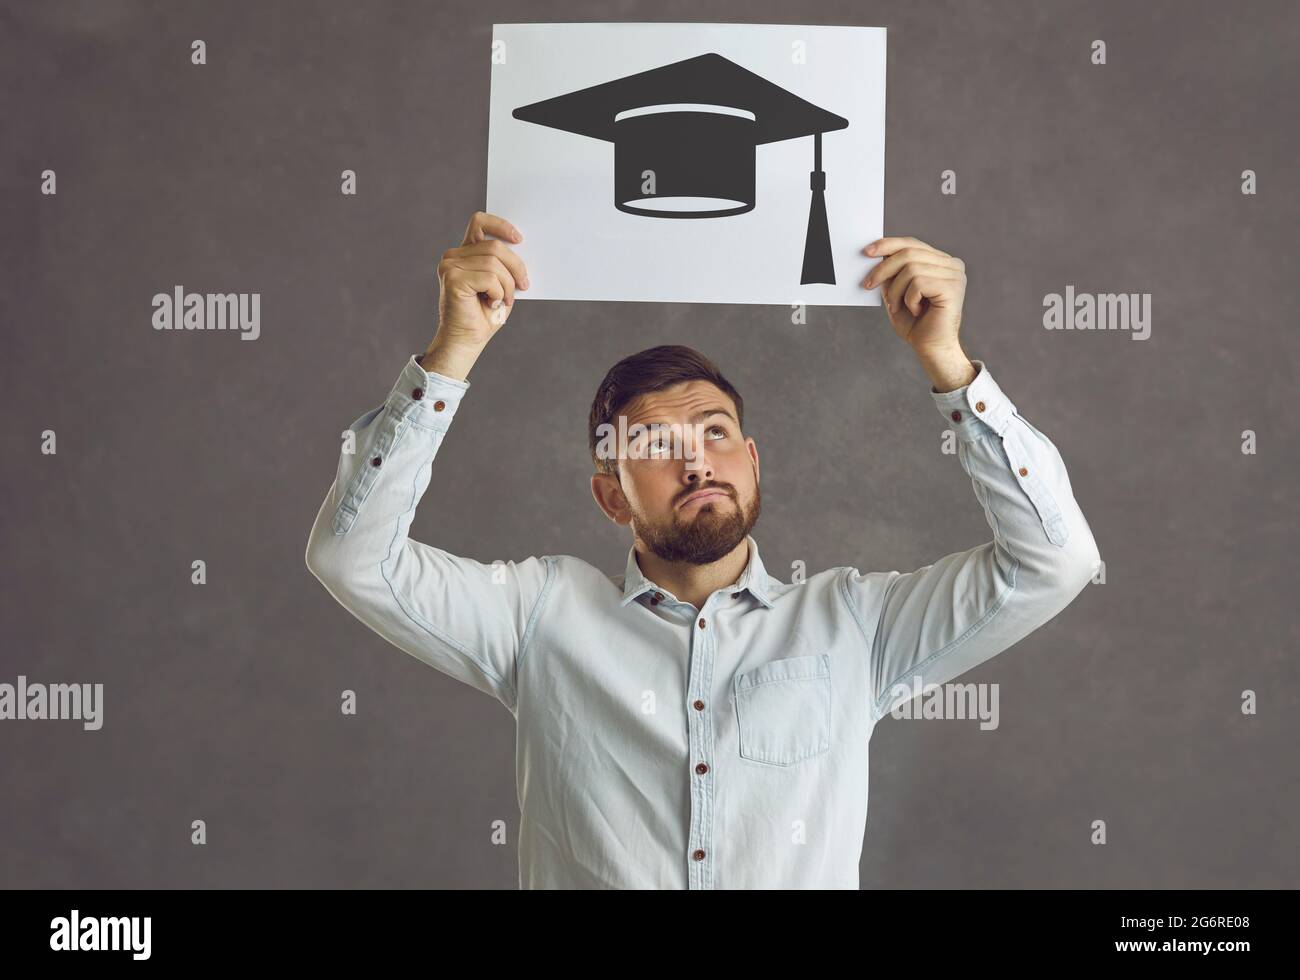 Student with a picture of an academic cap thinking of getting a university degree Stock Photo